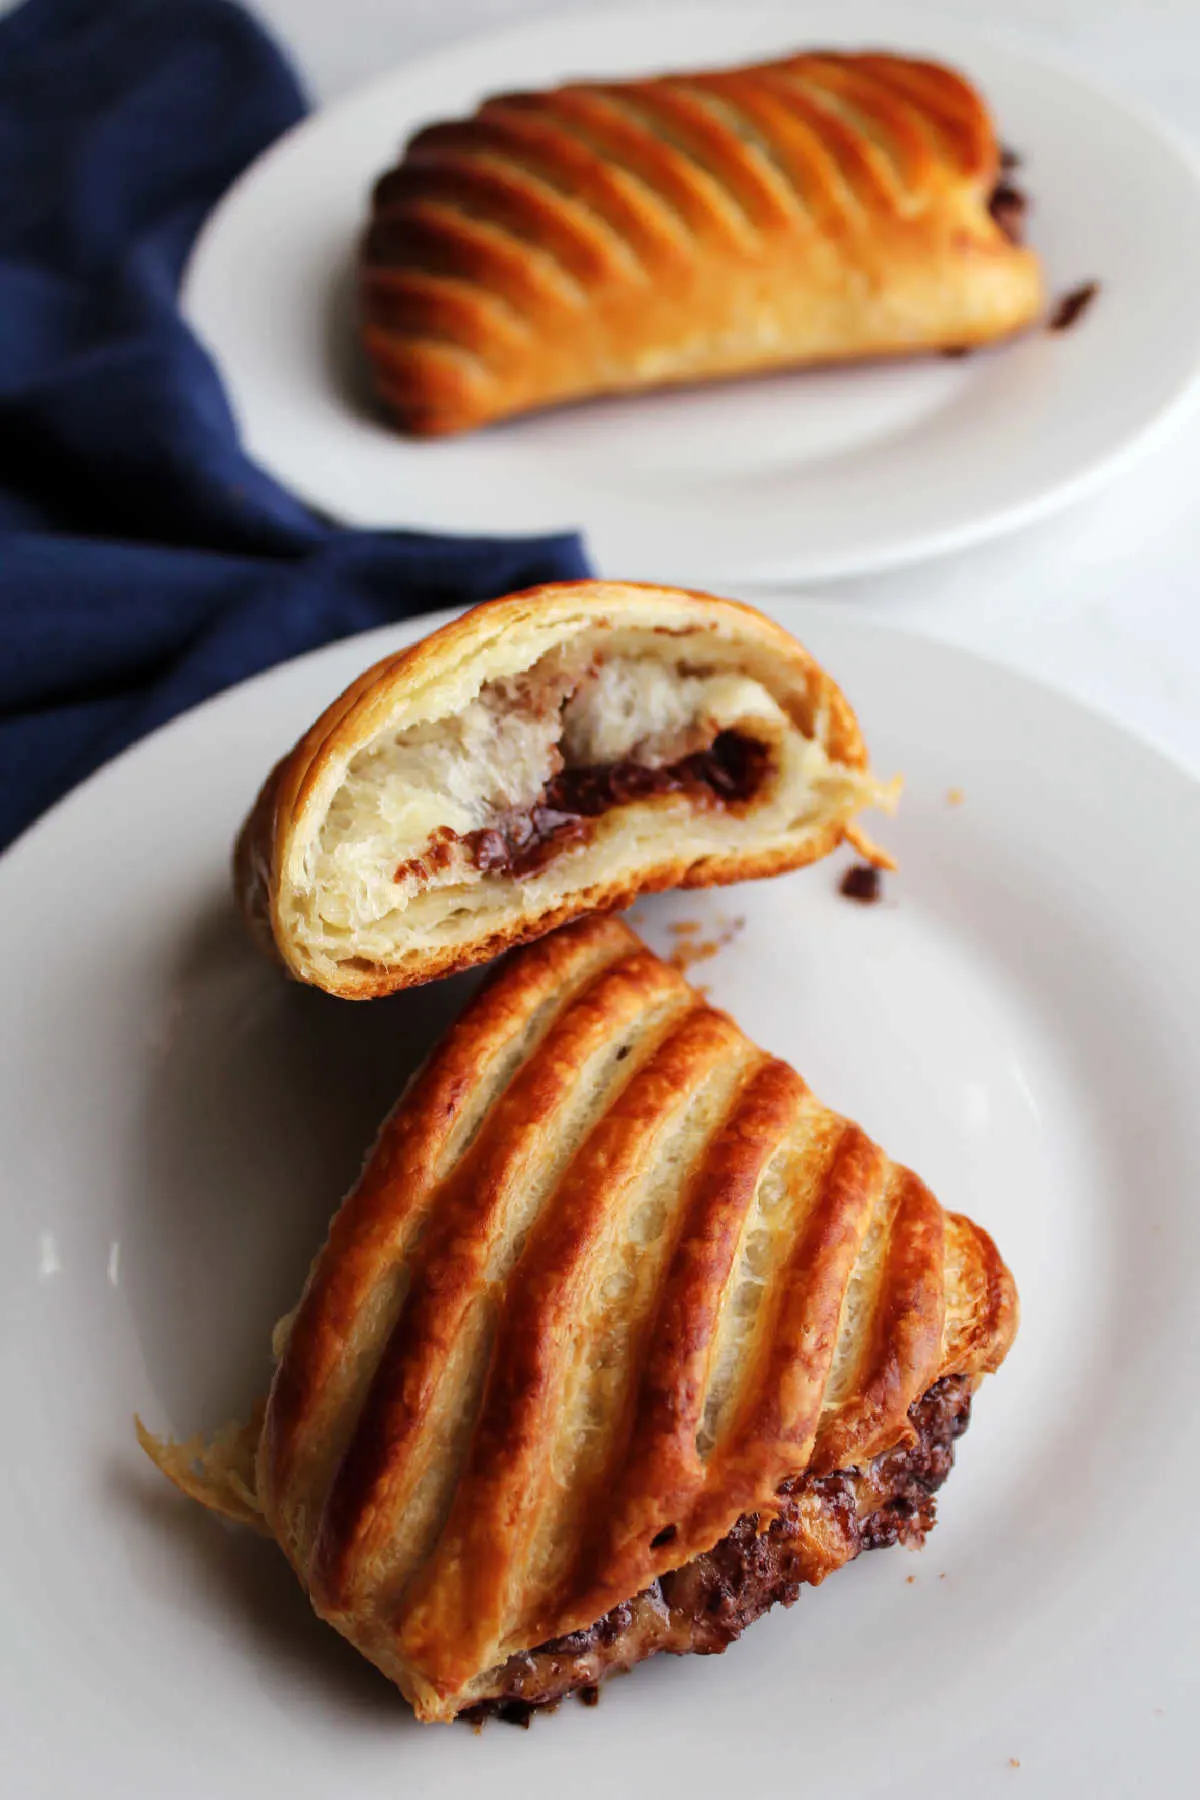 Inside of a freshly baked chocolate croissant with golden brown outside, flaky layers and melty chocolate in the middle.